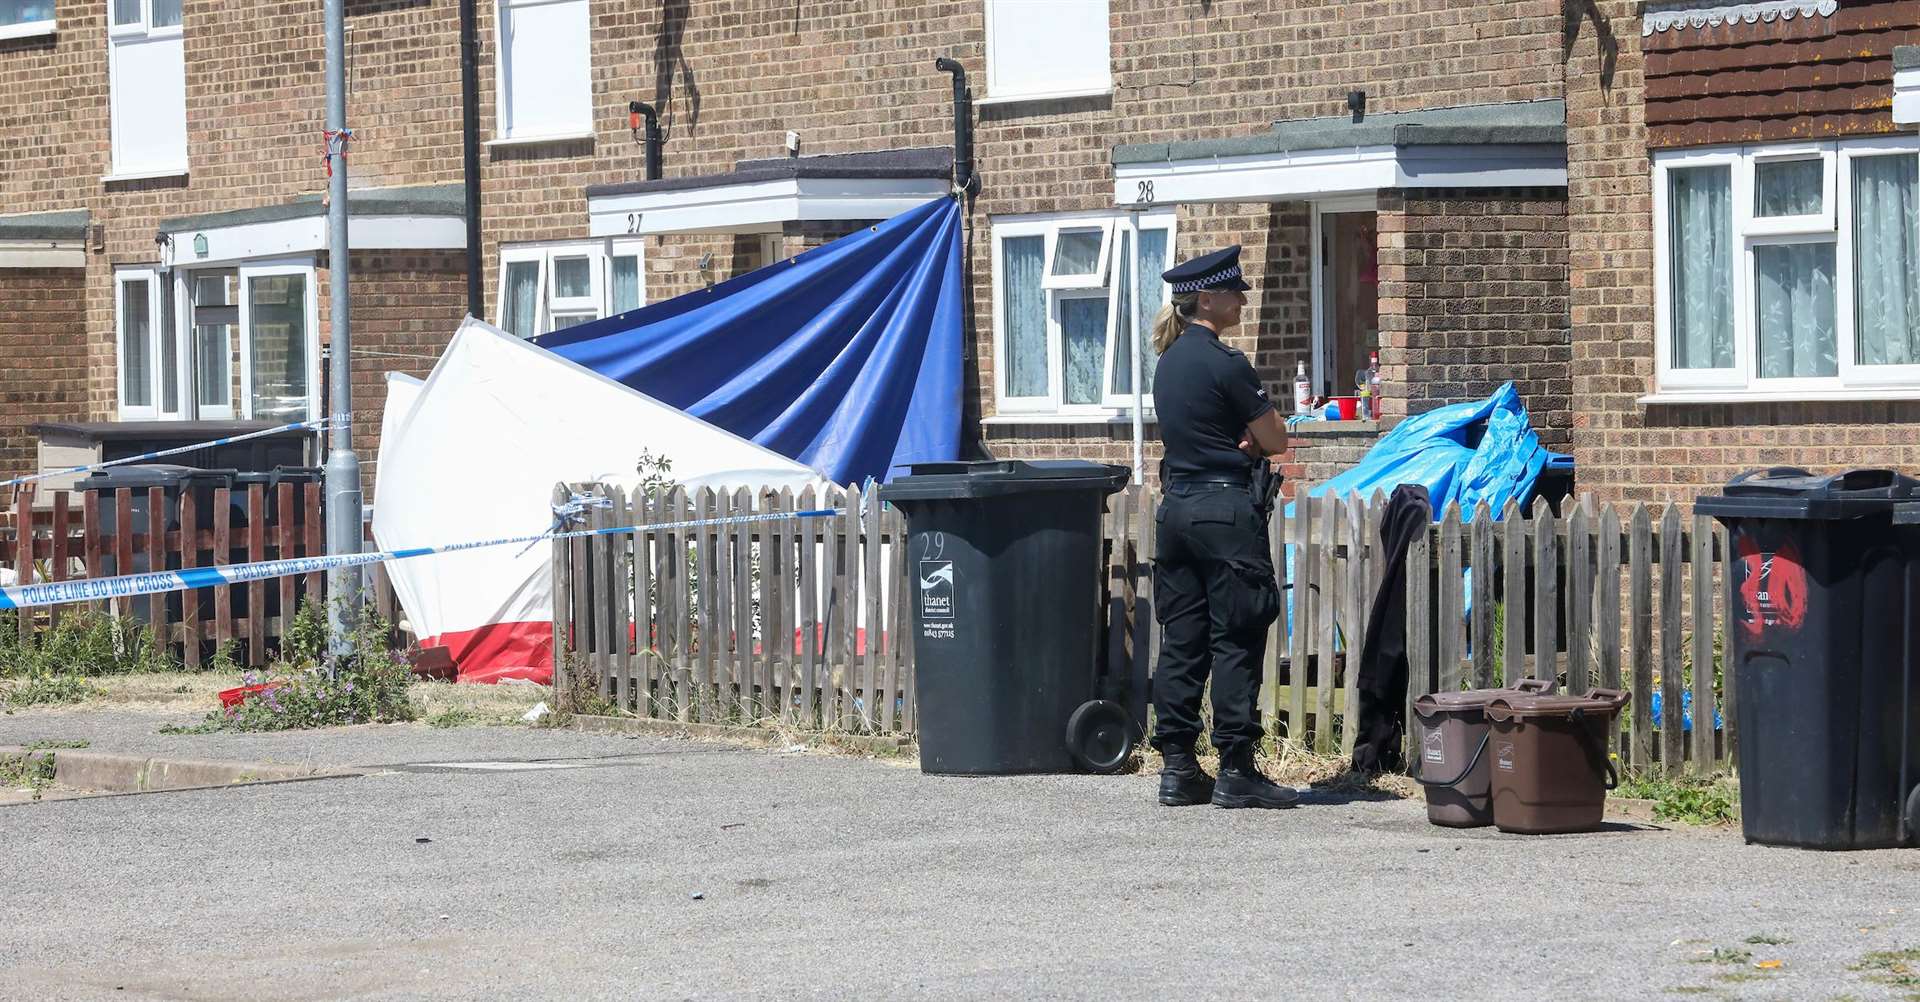 Police at the scene of the killing in Elfrida Close, Margate, in the aftermath. Picture: UKNIP